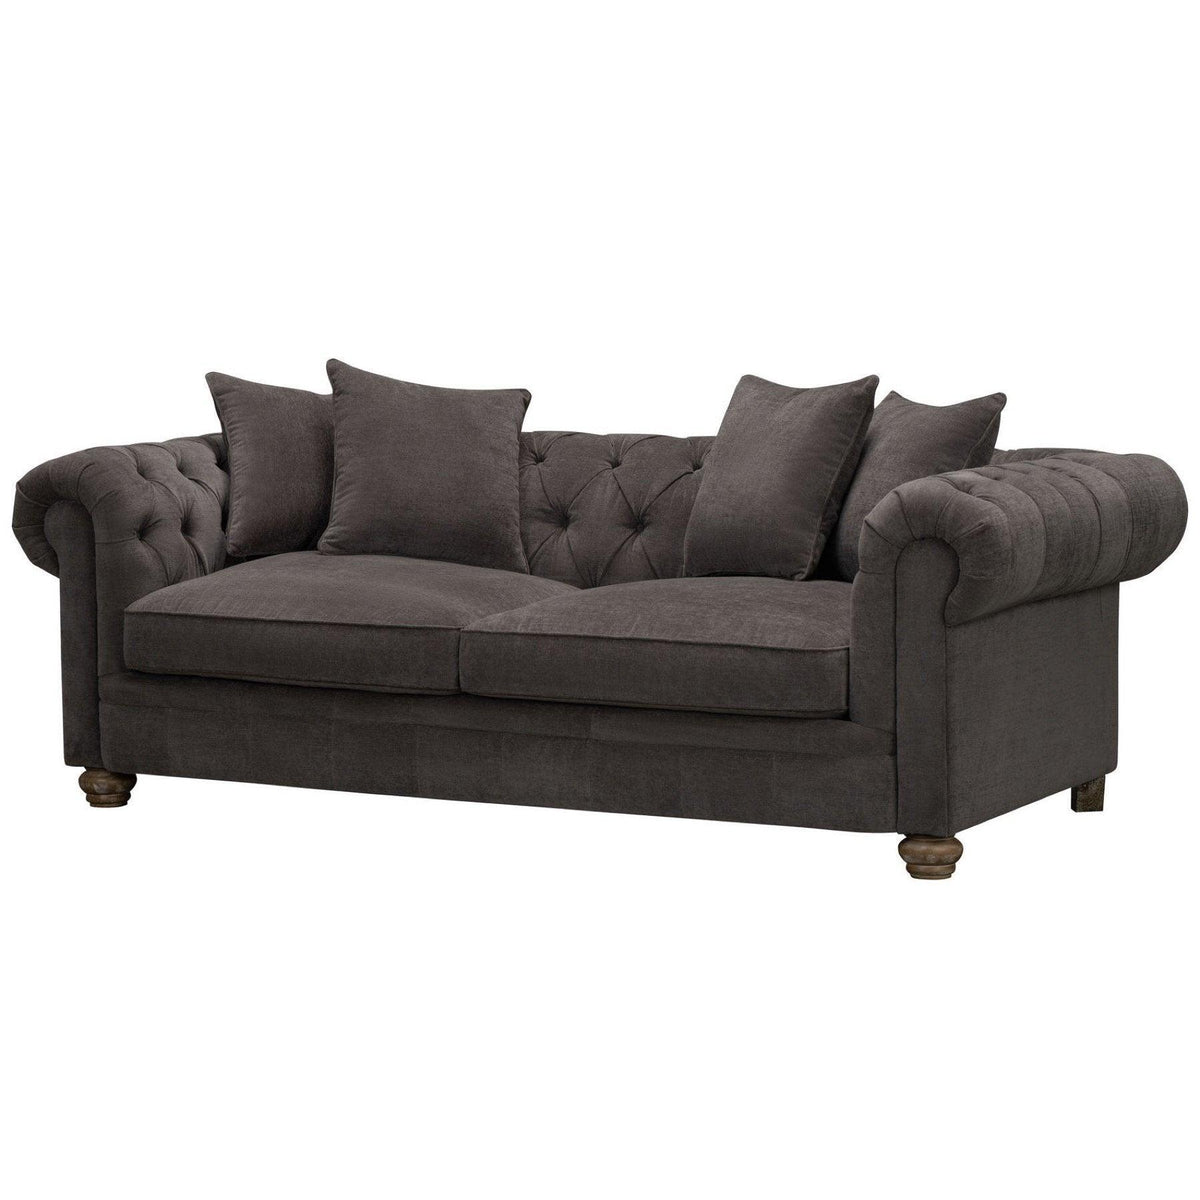 Windsor Chesterfield Three Seater Sofa - Vookoo Lifestyle